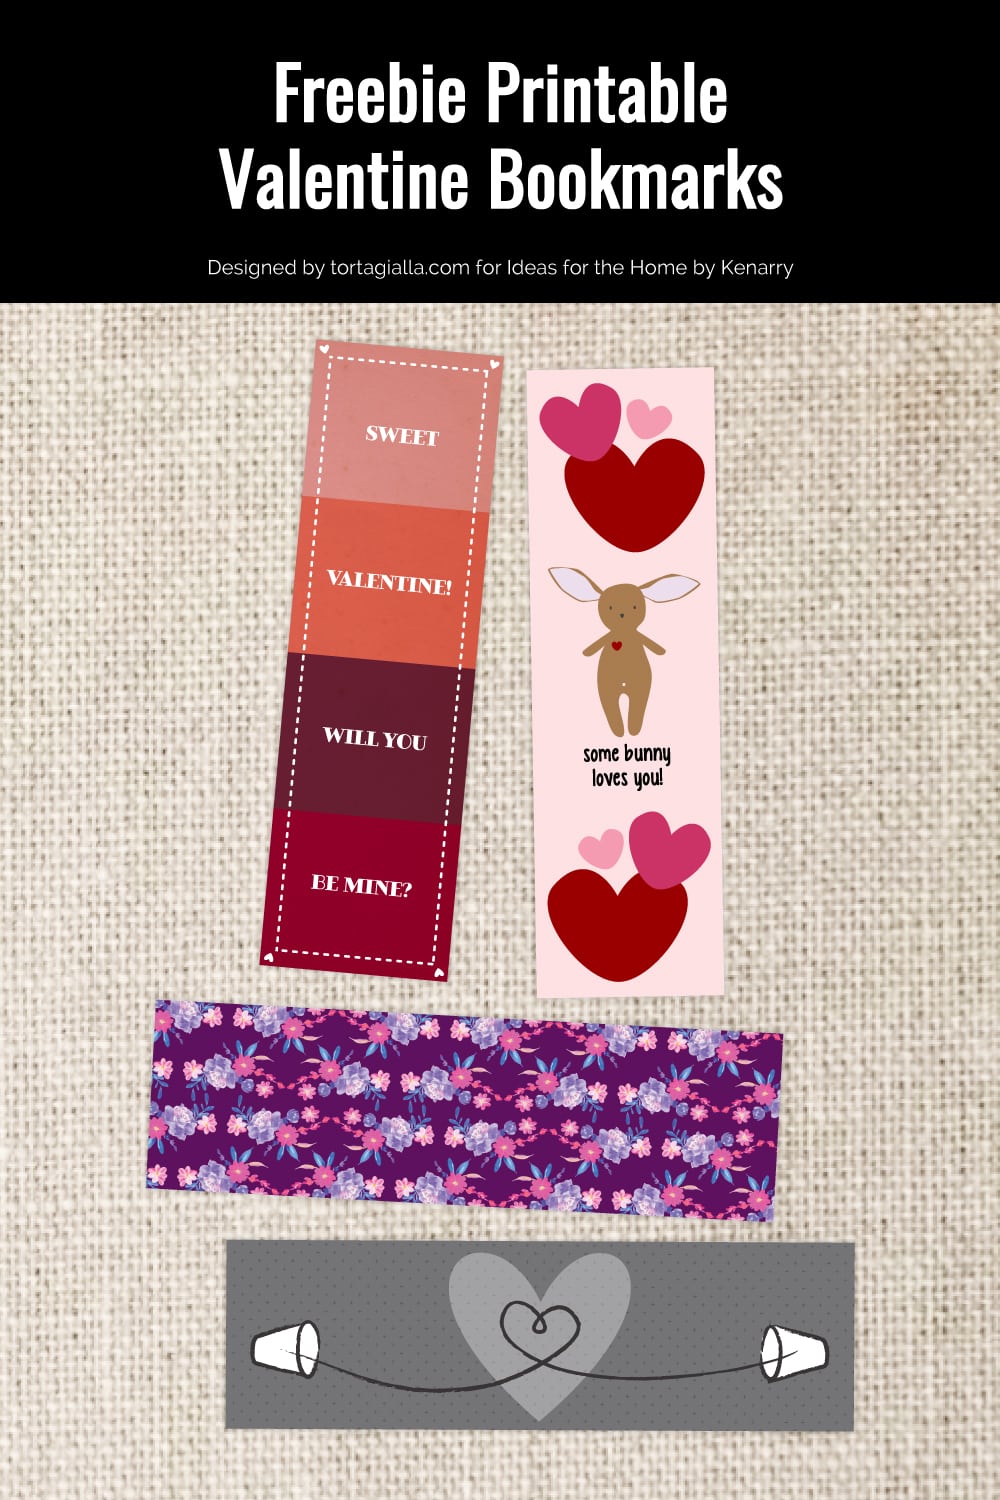 Preview of valentine printable bookmarks on linen cloth background in beige color. 